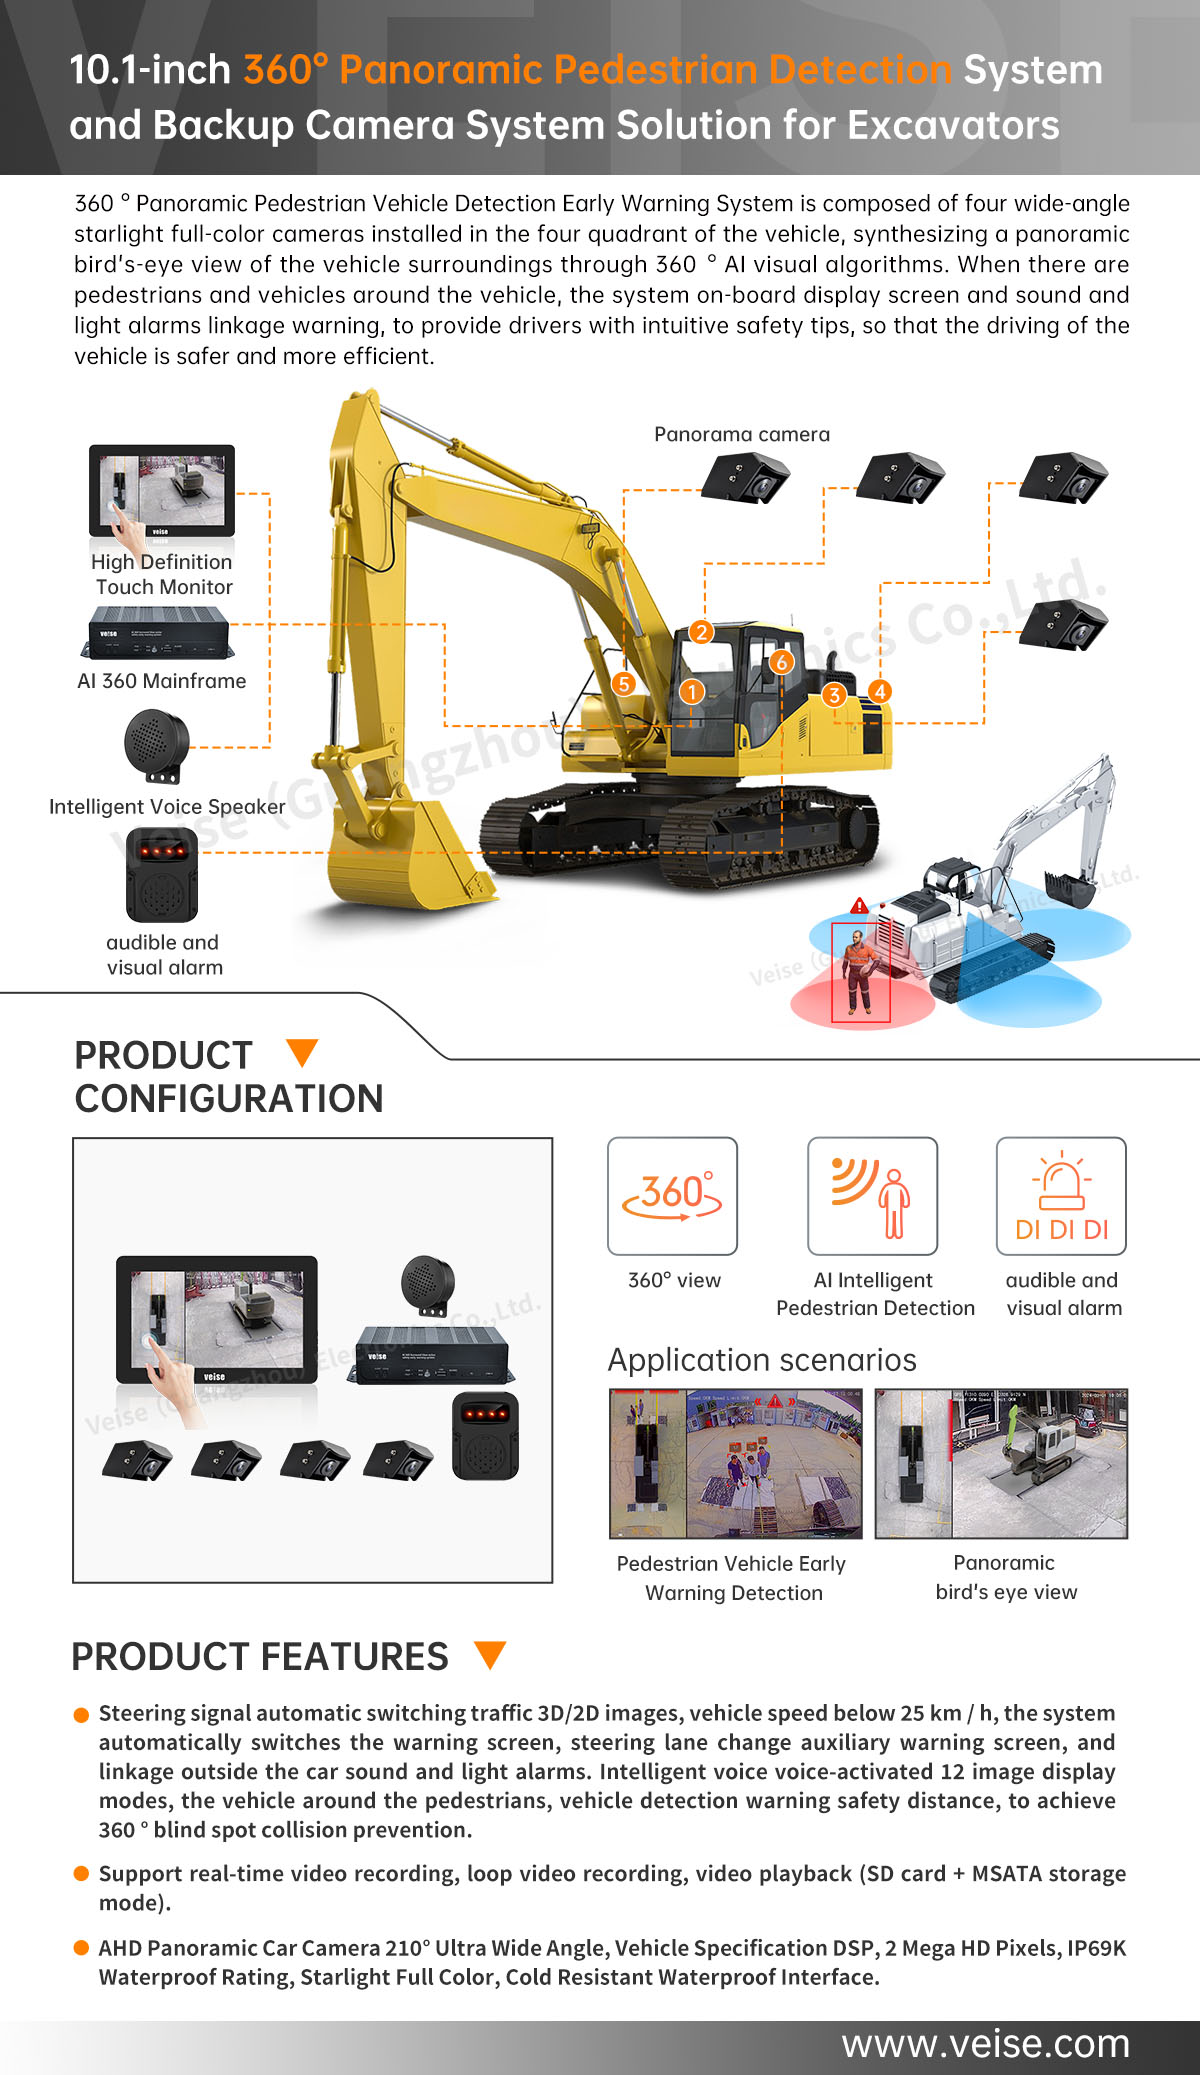 10.1-inch 360° Panoramic Pedestrian Detection System and Backup Camera System Solution for Excavators